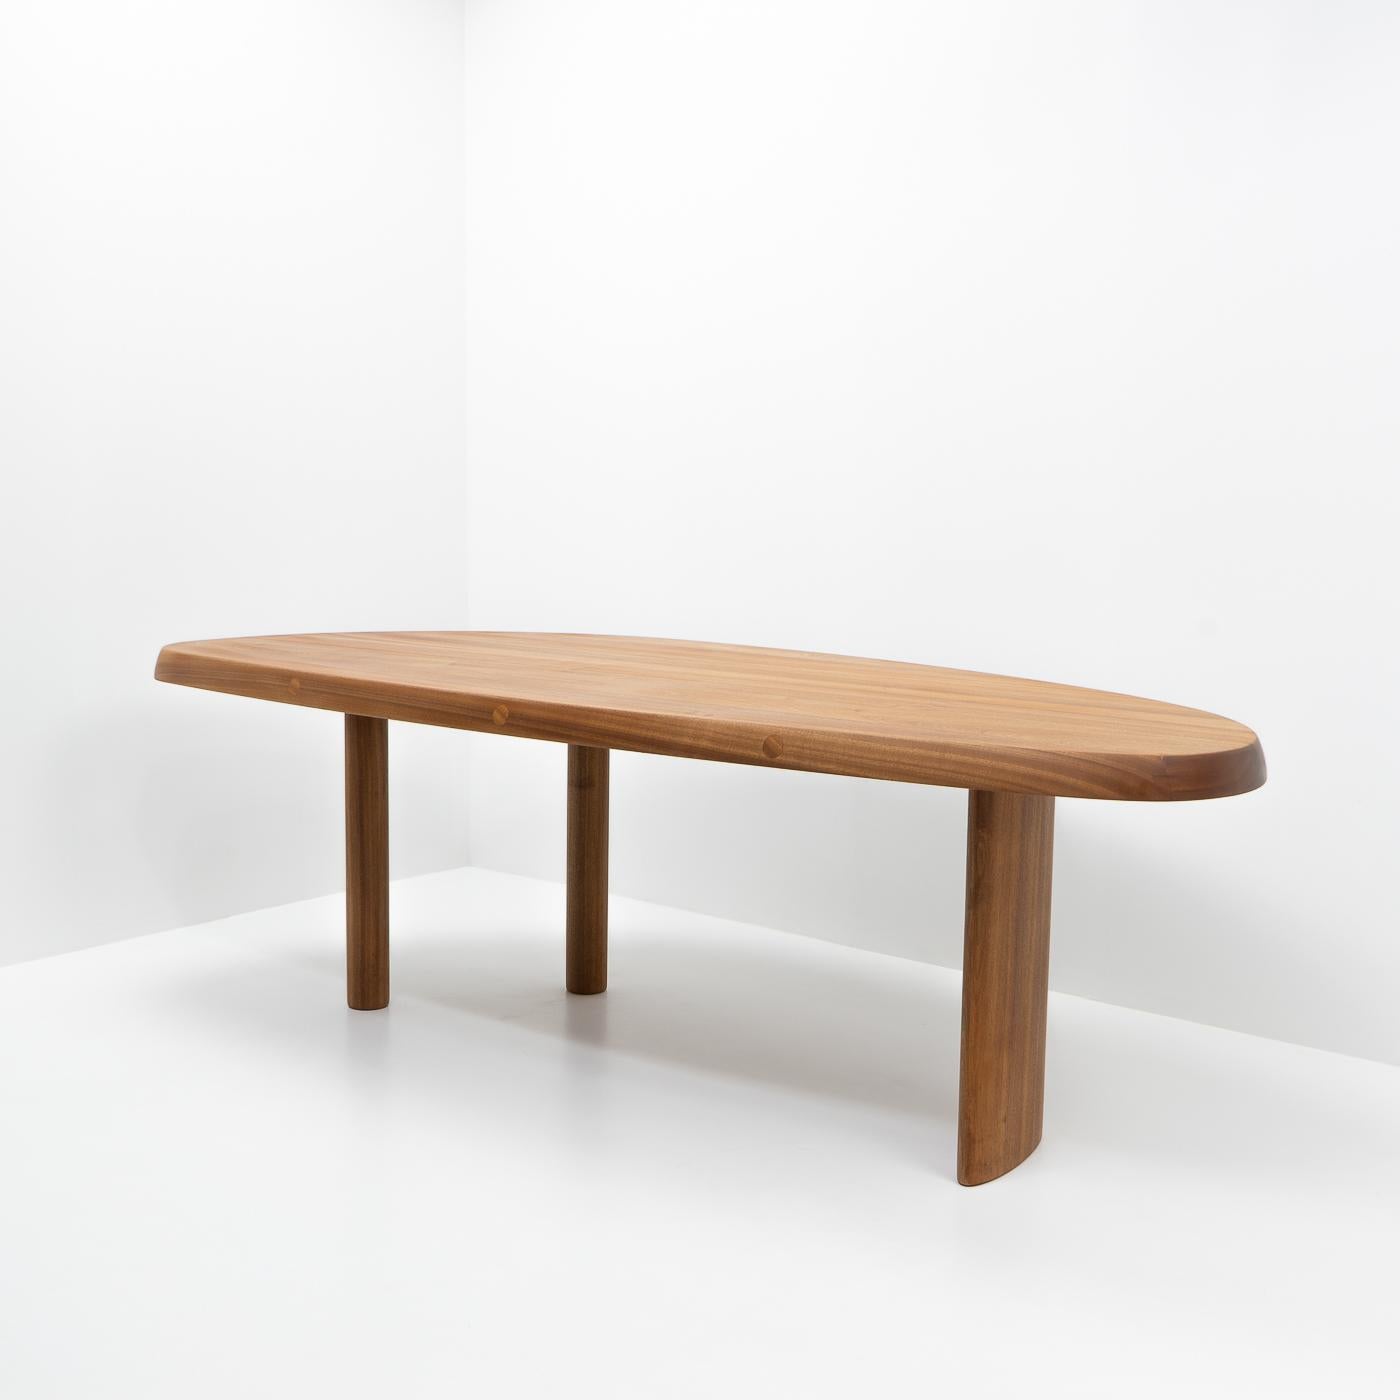 Italian Modernist Design Free Form Dining Table by Charlotte Perriand, Cassina, 2000s